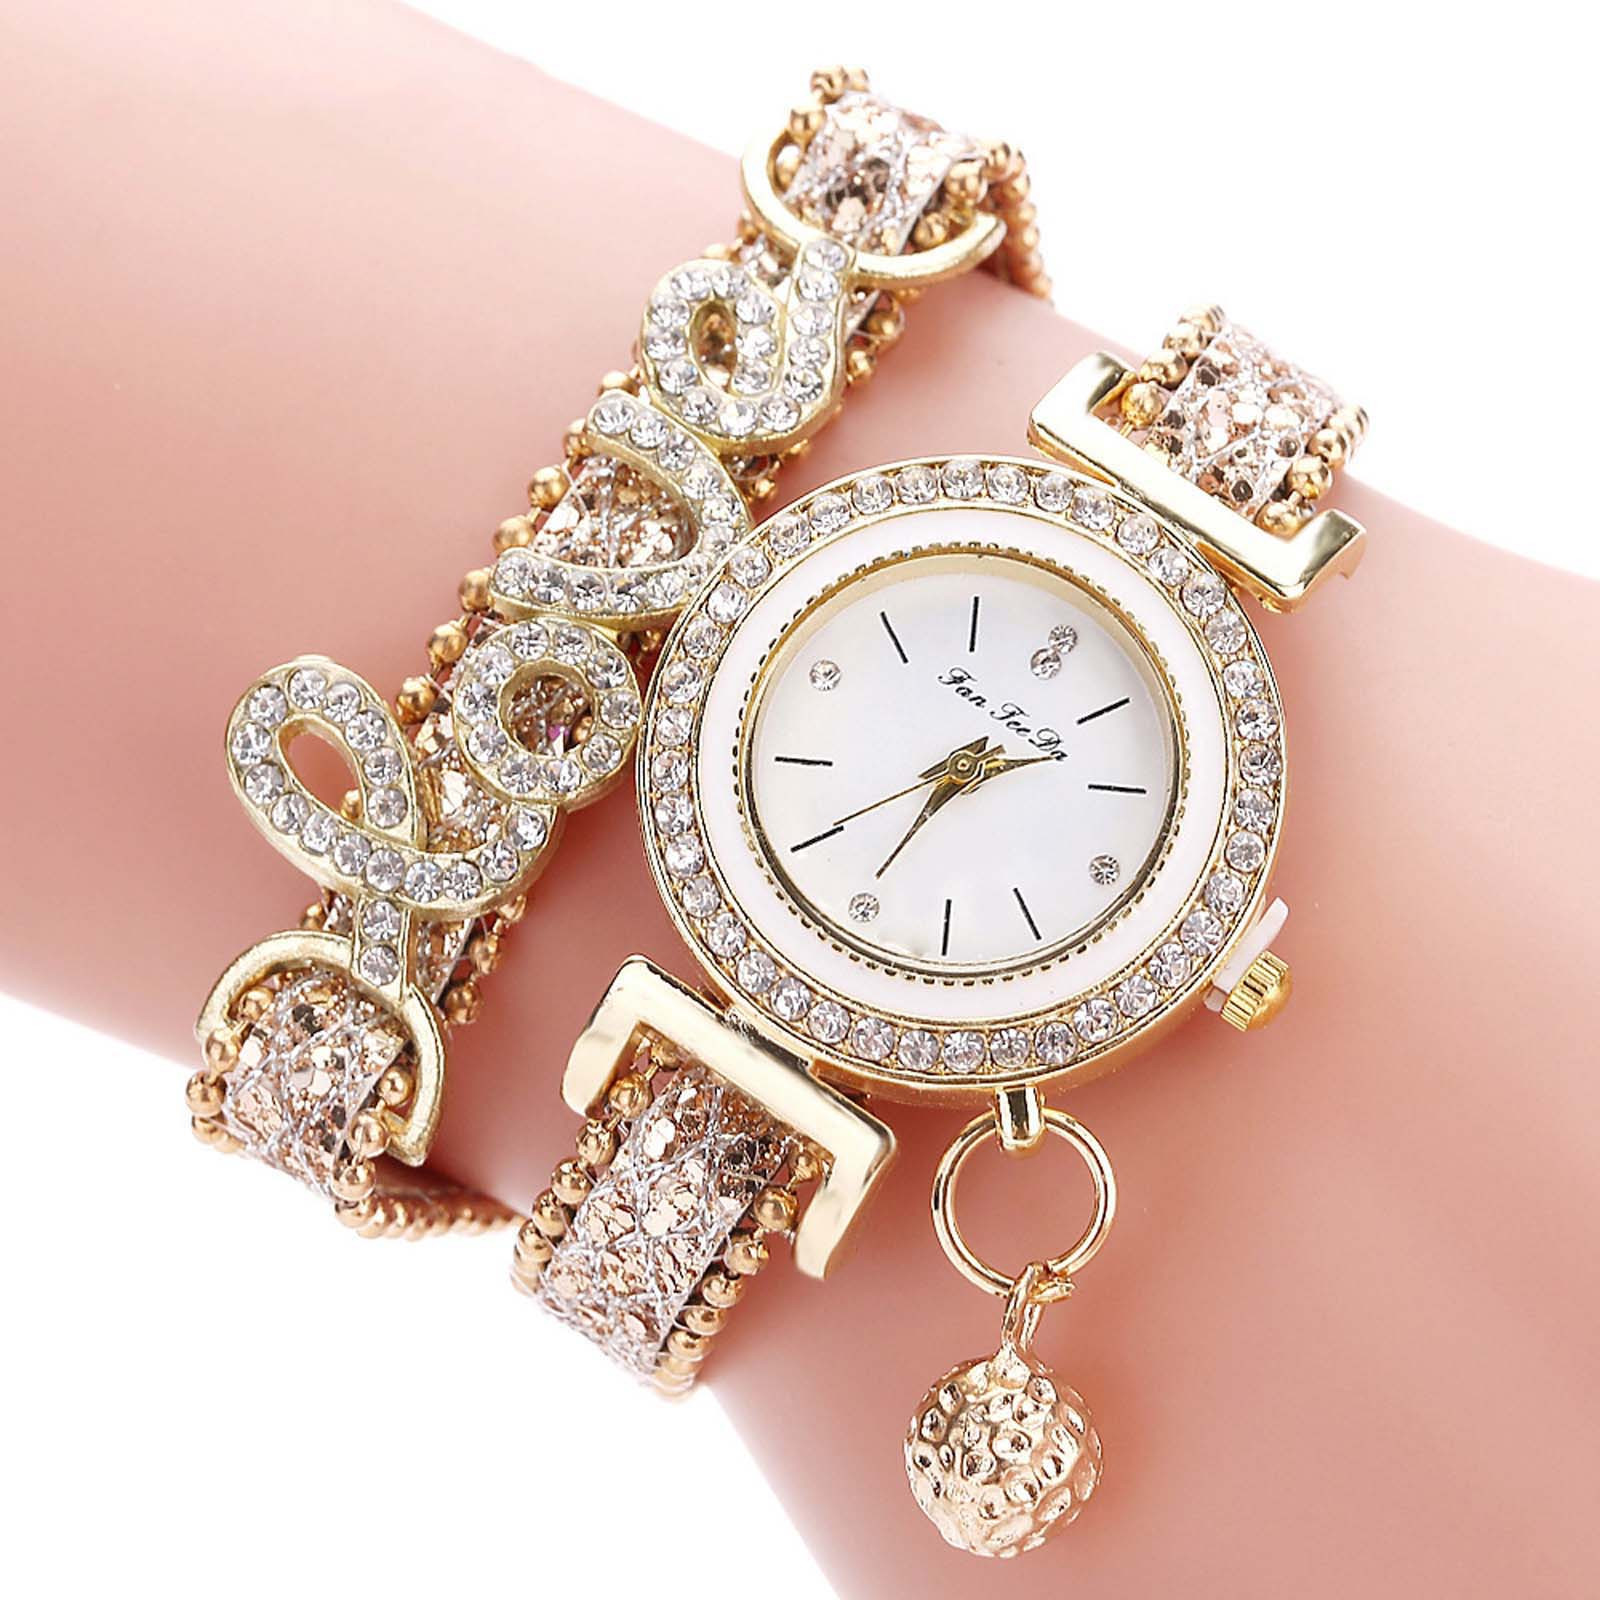 Holiday Savings Deals! Kukoosong Womens Watches Clearance Sale Prime  Bracelet Watch Love Leather Strap Water Diamond British Watch Luxu Ladies  Watches